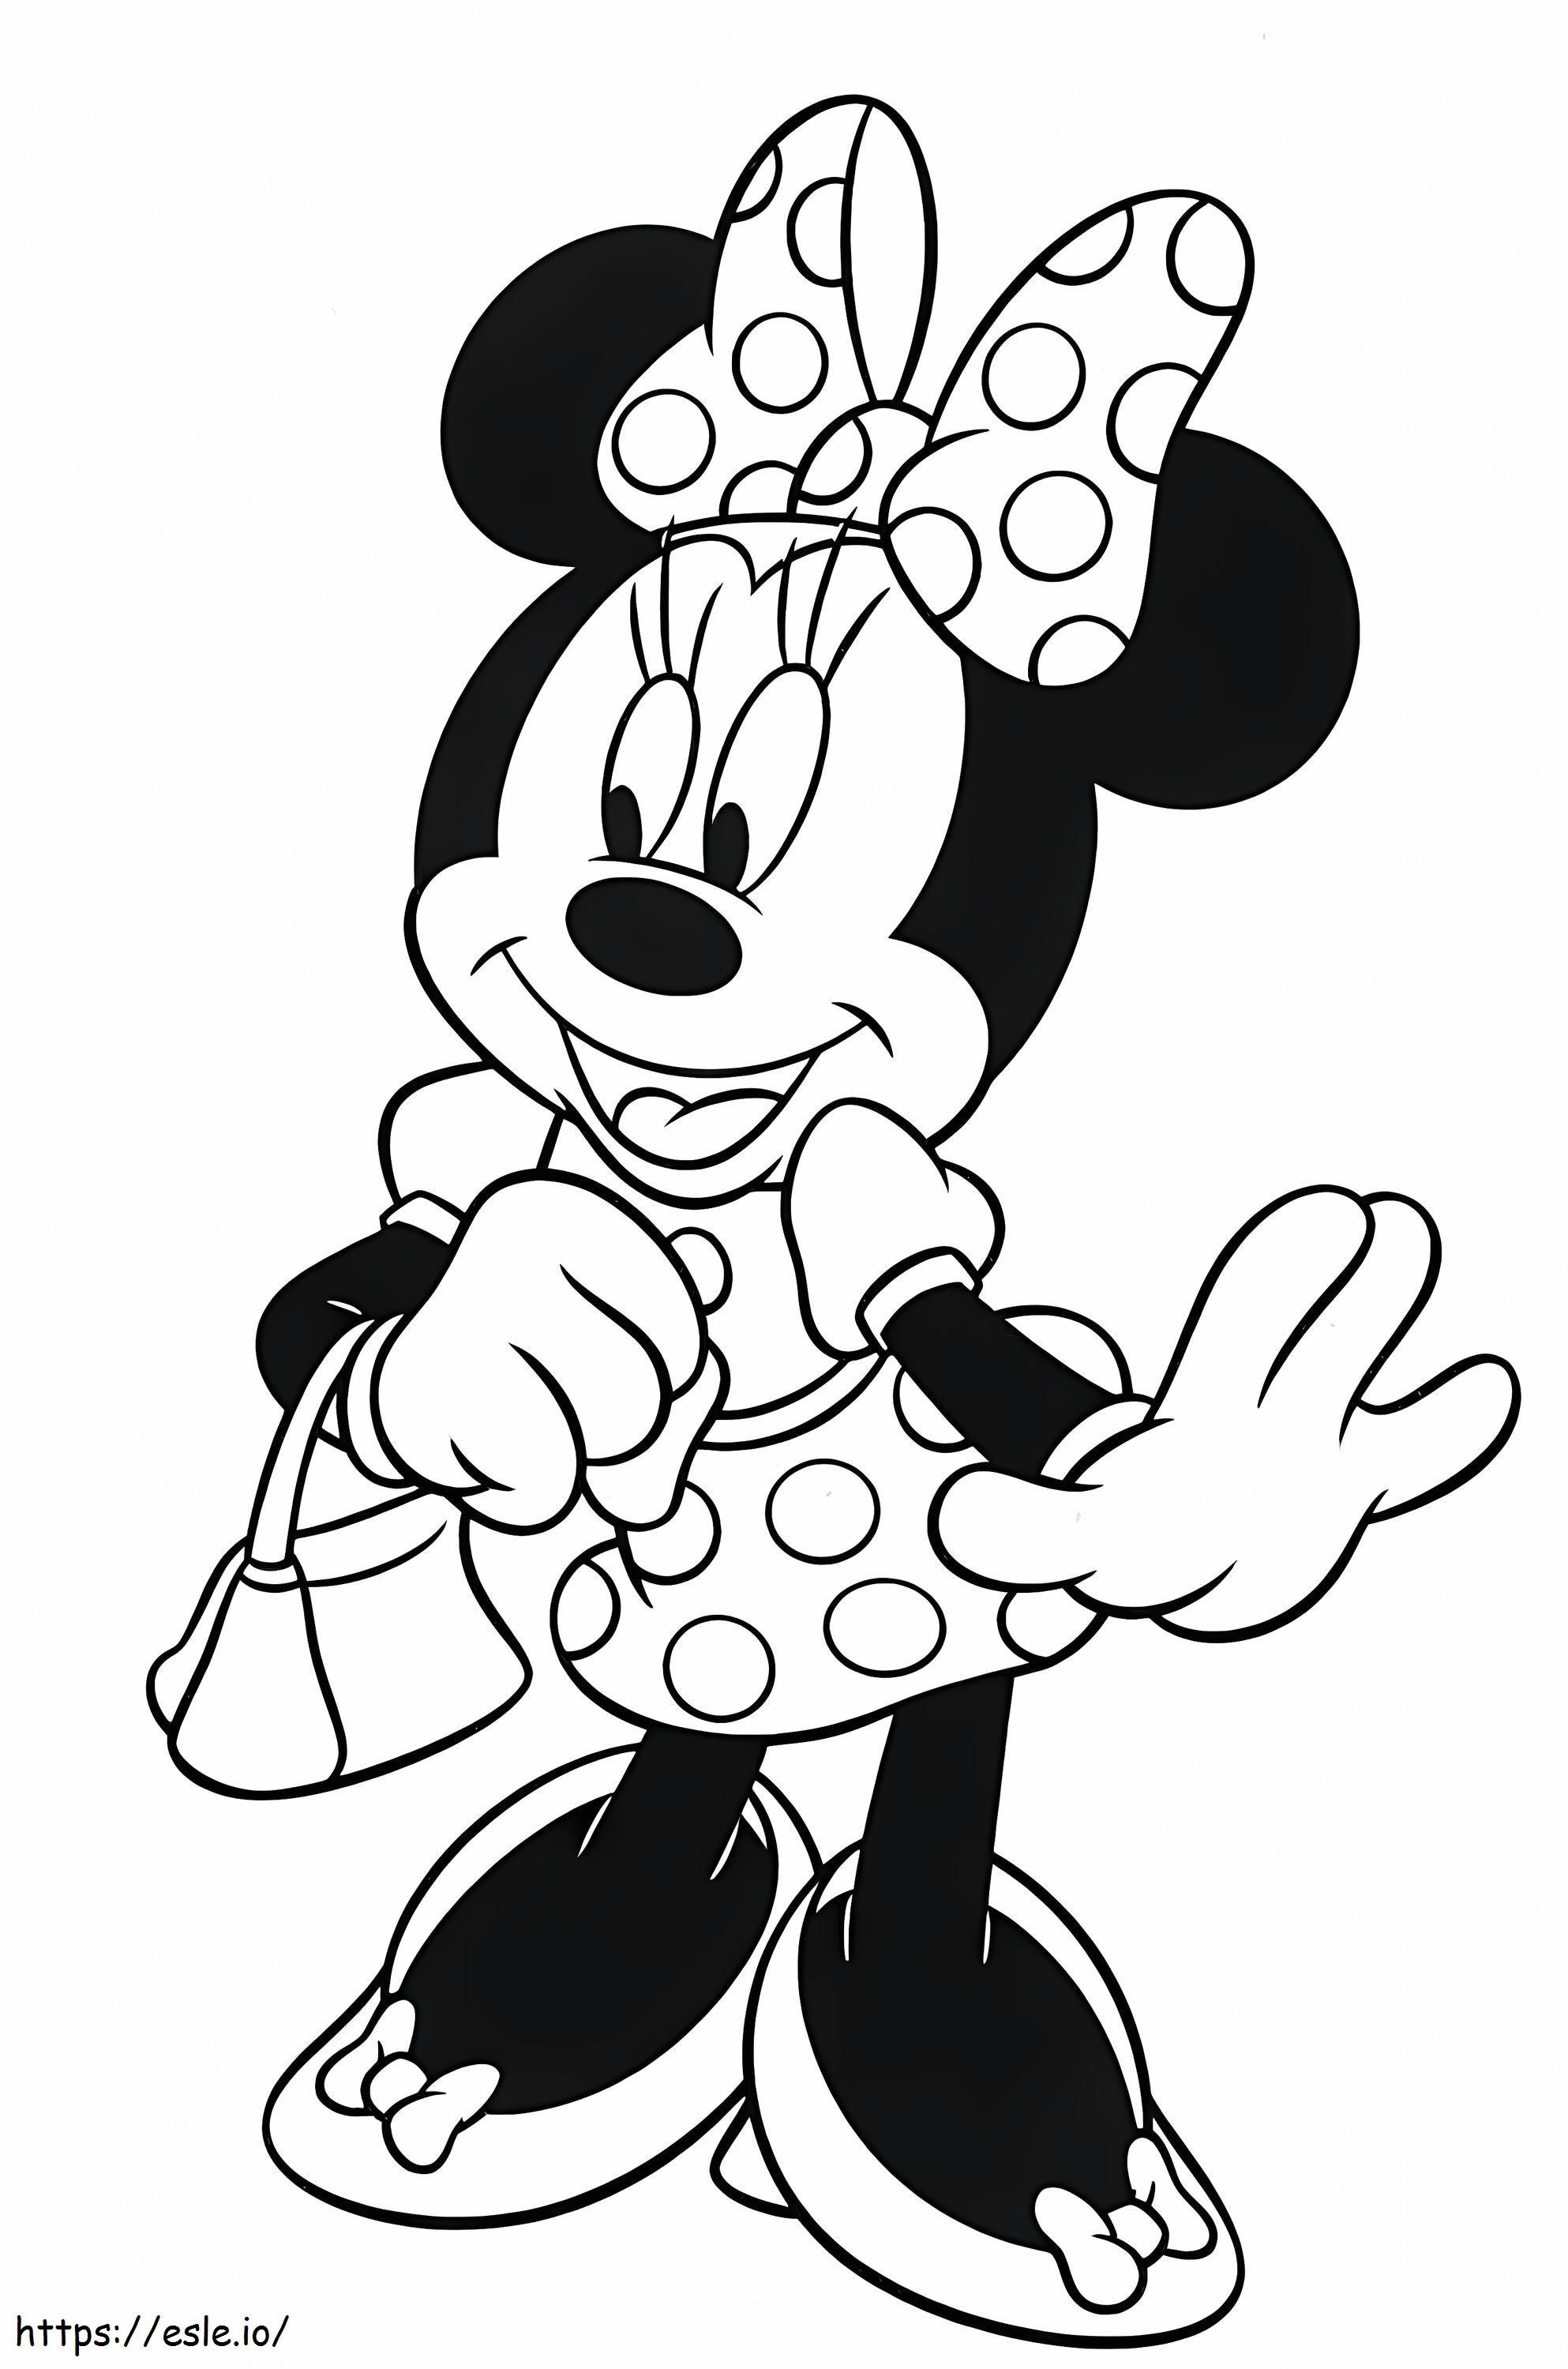 Minnie Mouse With Bag coloring page